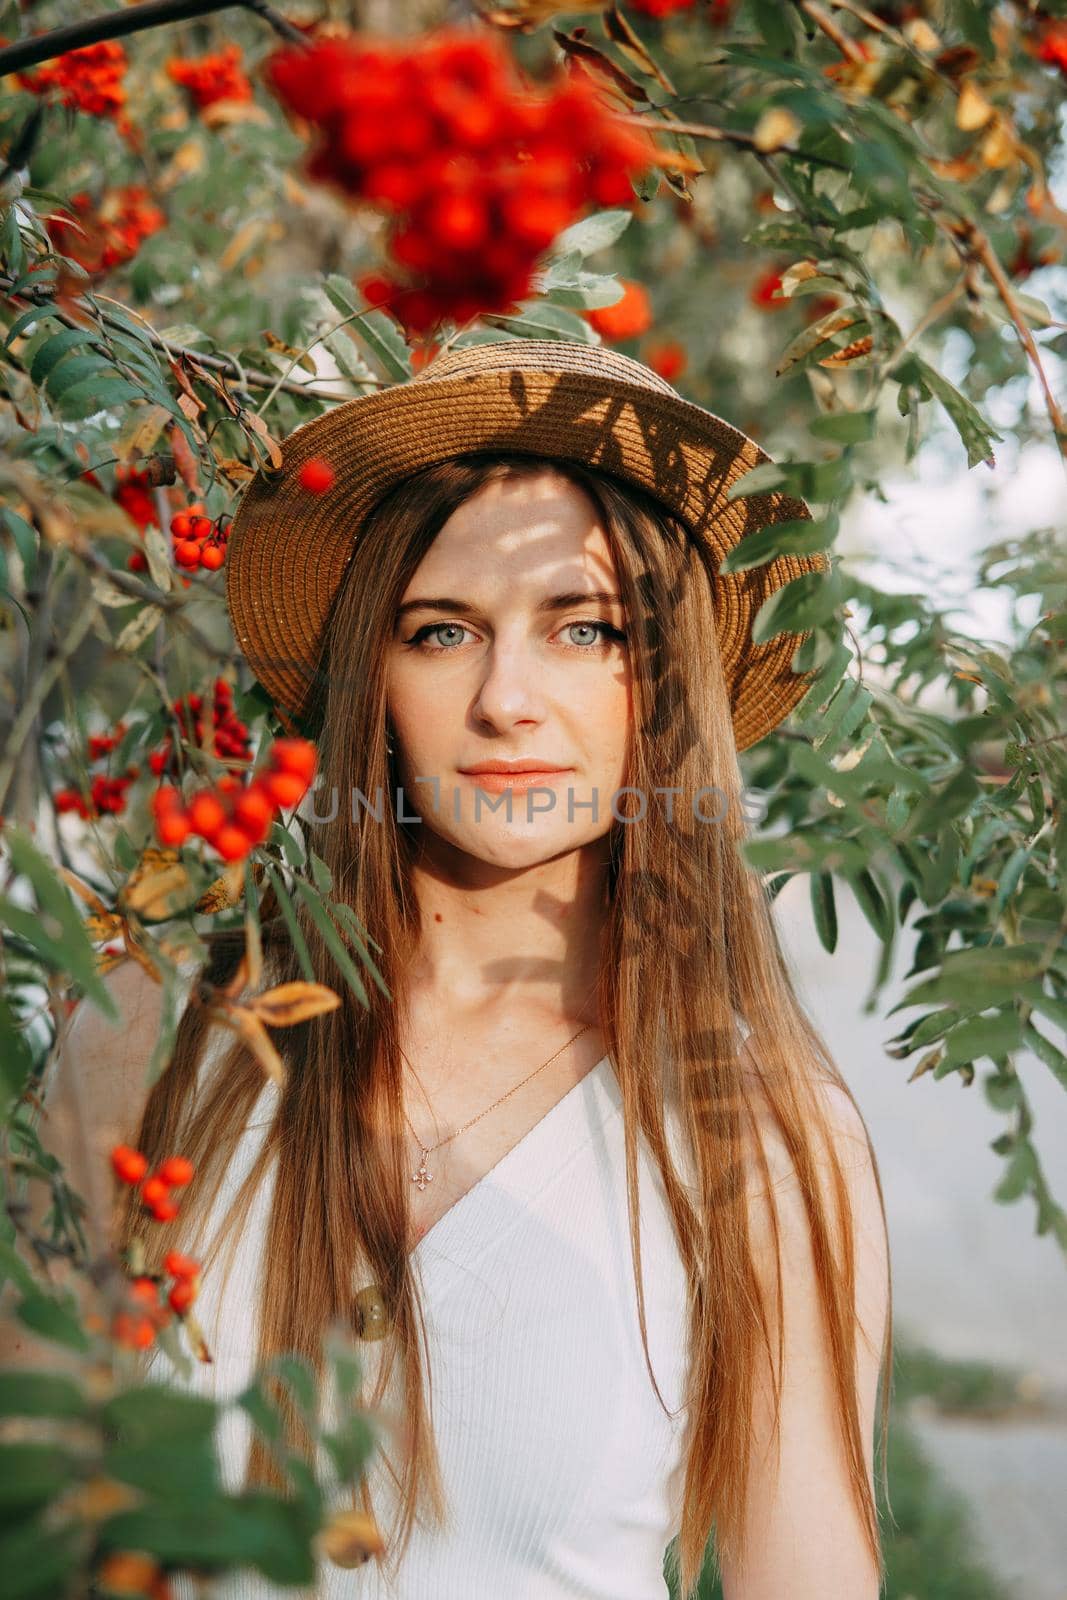 A beautiful blonde girl in a hat with long hair, on a walk in the autumn season. Portrait of a woman at a rowan tree by Annu1tochka